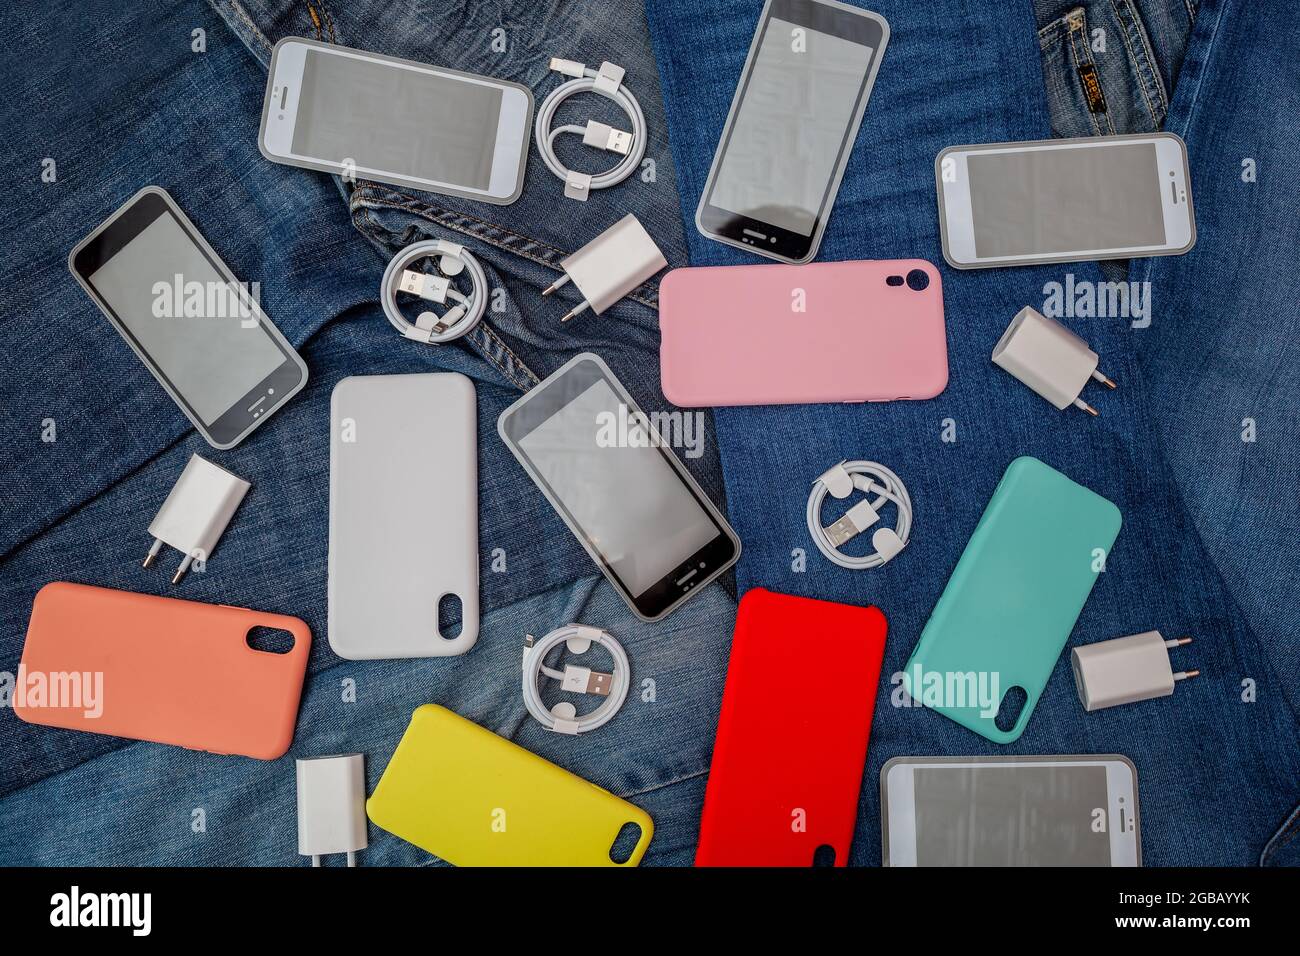 texture of mobile phone accessories on a denim background Stock Photo